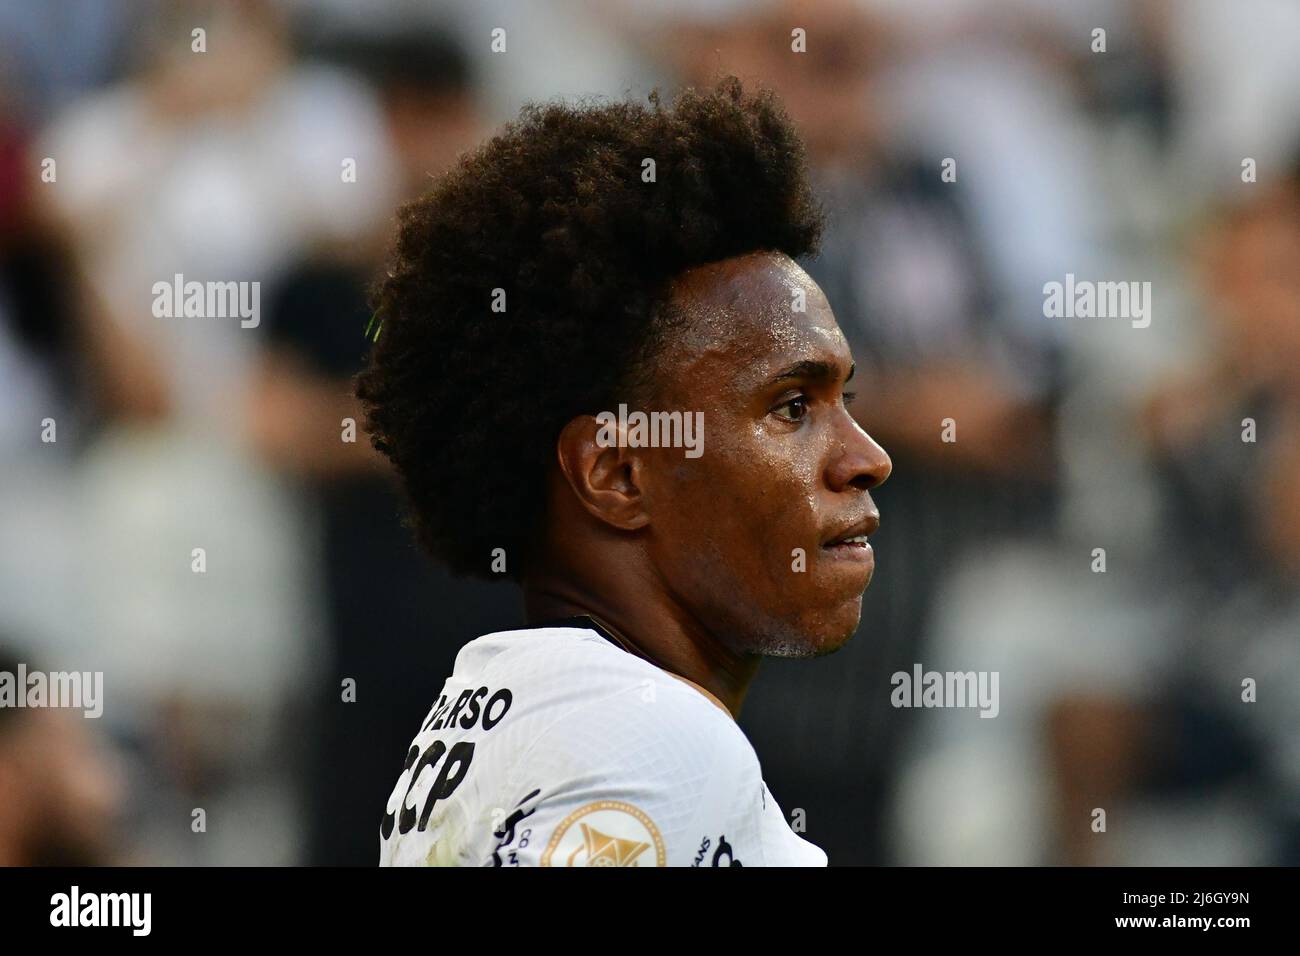 SÃO PAULO, BRASIL - MAY 1: William of S.C. Corinthians during Campeonato Brasileiro Série A 2022 match between S.C. Corinthians and Fortaleza at Neo Quimica Arena on May 1, 2022 in Sao Paulo, Brazil. (Photo by Leandro Bernardes/PxImages) Stock Photo